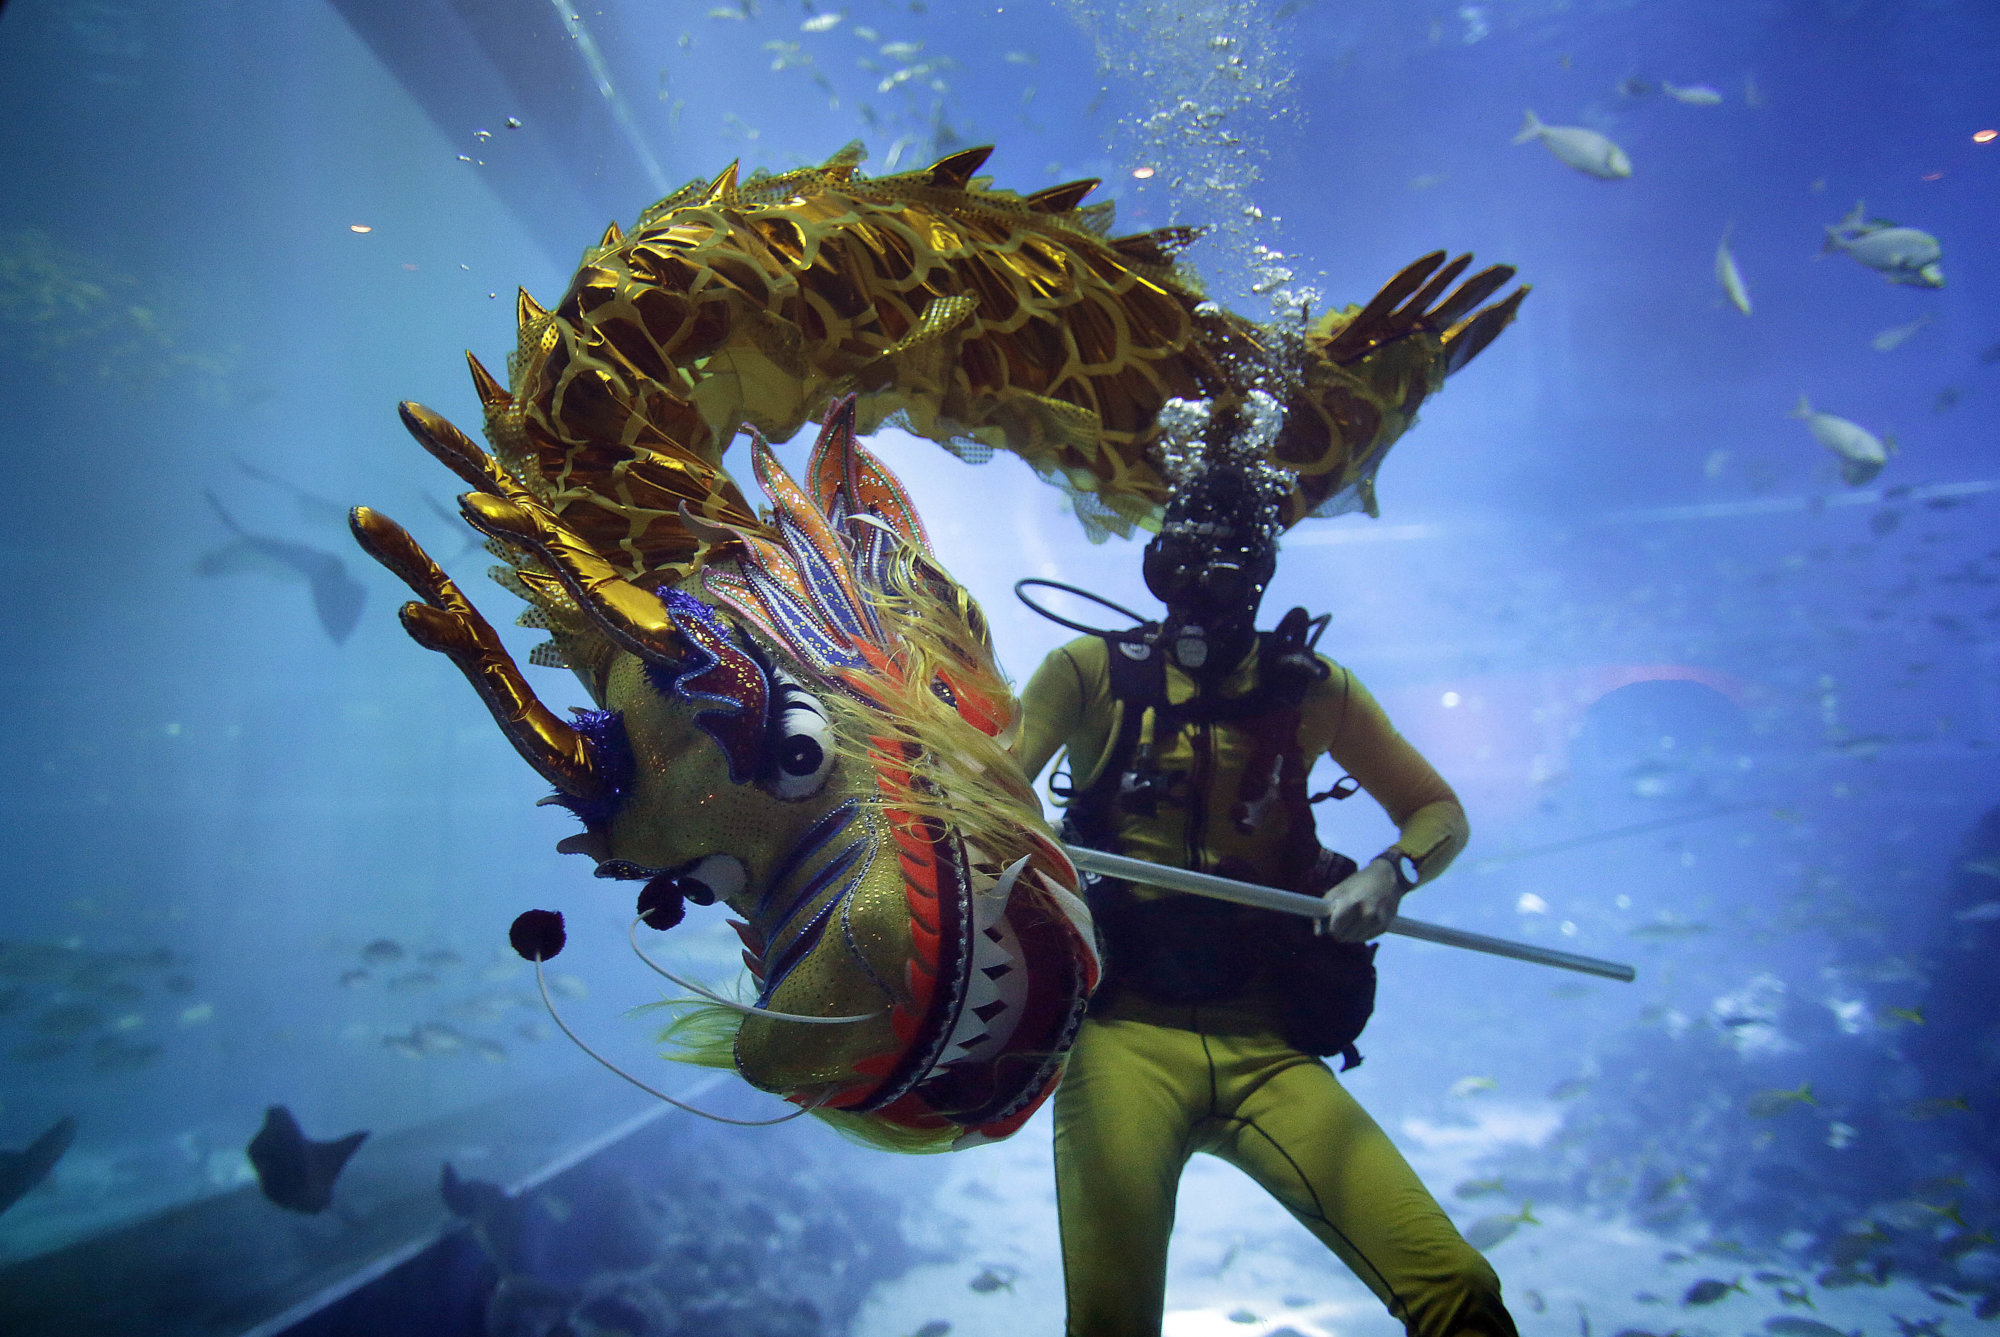 A diver performs a dragon dance underwater at the South East Asia Aquarium in Resorts World Sentosa, a popular tourist destination as part of Chinese New Year celebrations on Wednesday, Jan. 25, 2017 in Singapore. The tradition of dragon dance performances, usually on land, is believed to bring blessings to guests for an auspicious Lunar New Year. (AP Photo/Wong Maye-E)